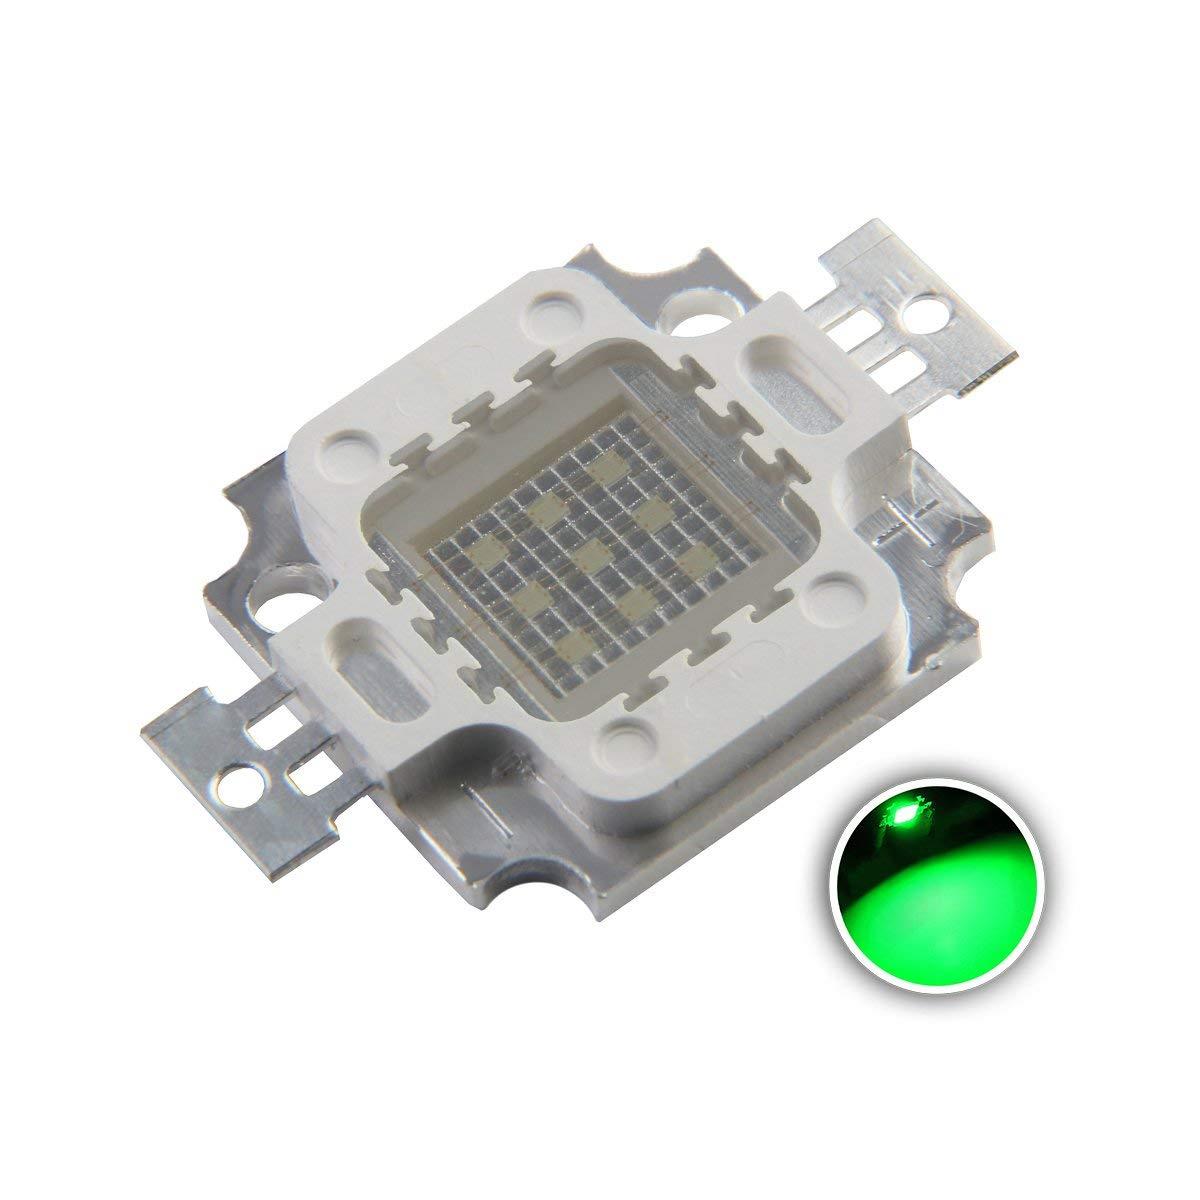 10W Green Color High Power Led Chip